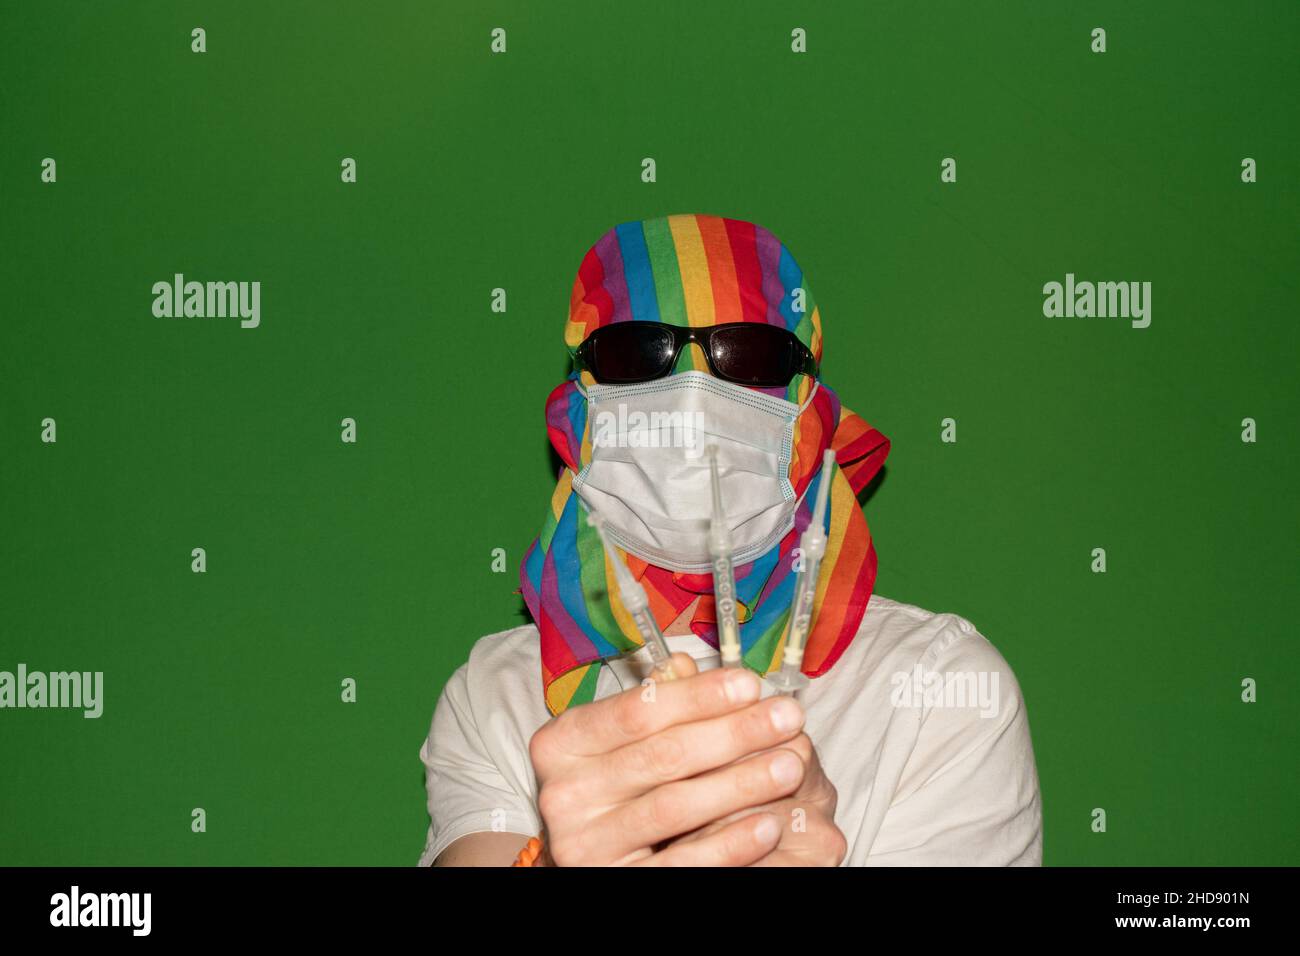 Vaduz, Liechtenstein, December 24, 2021 Person with a medical face mask and a gender rainbow flag is showing some syringes Stock Photo